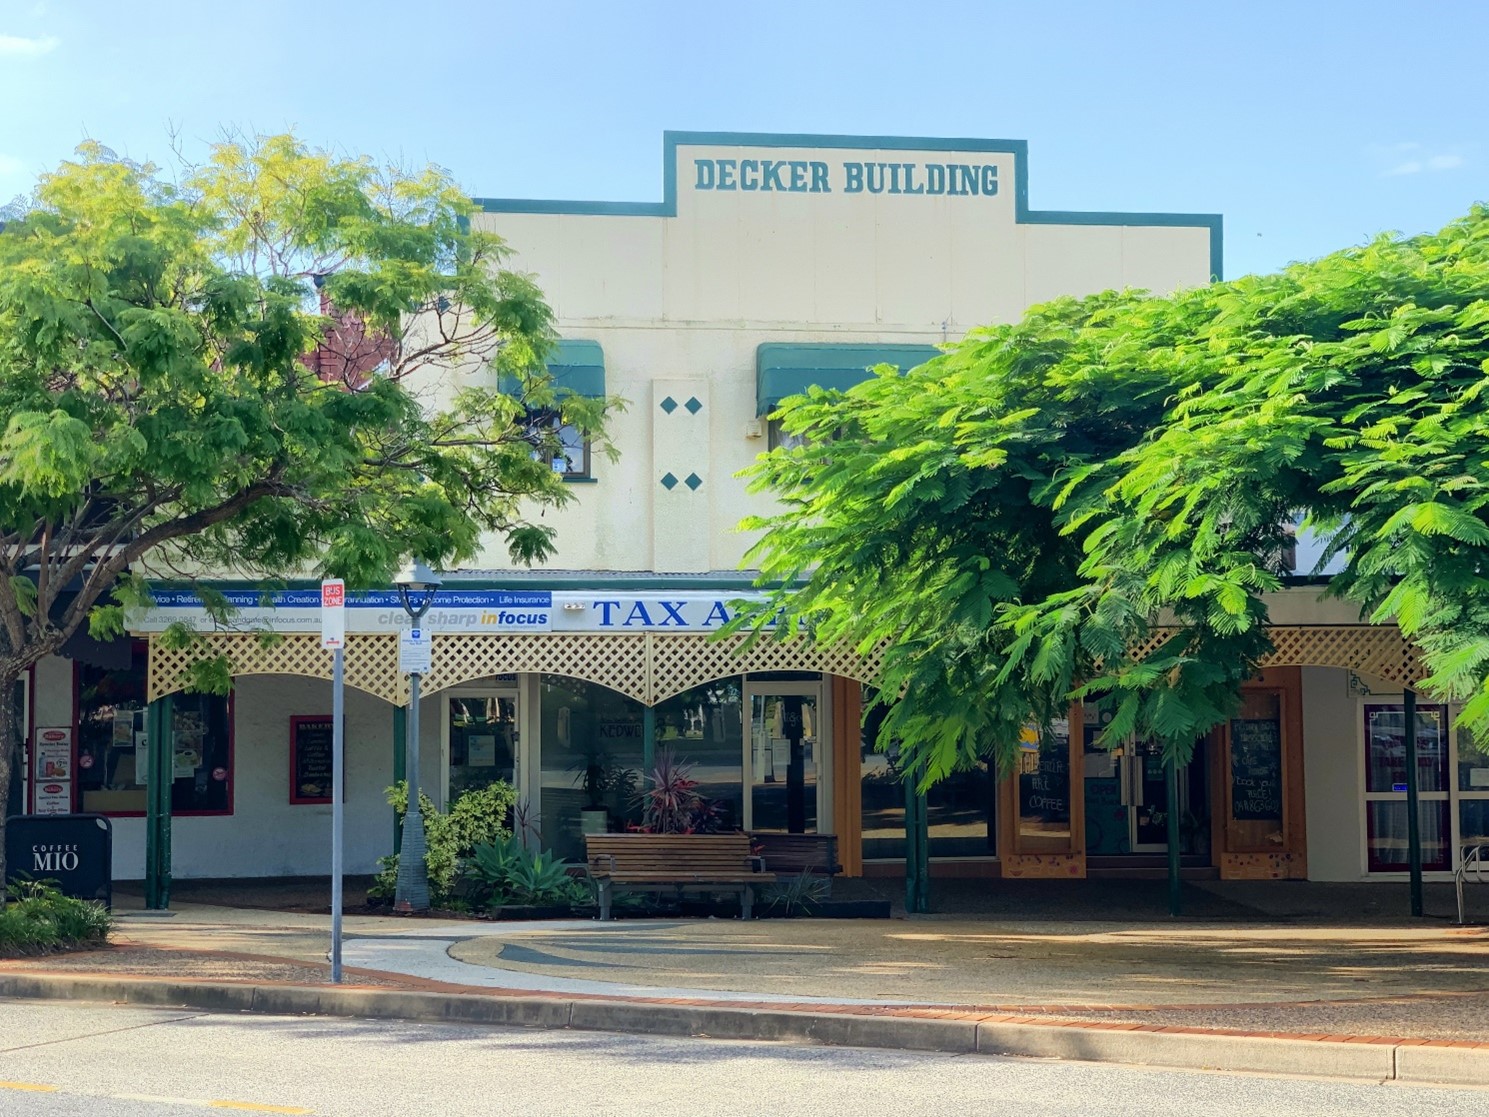 This is an image of the local heritage place known as the Decker Building, 8 Brighton Road, Sandgate